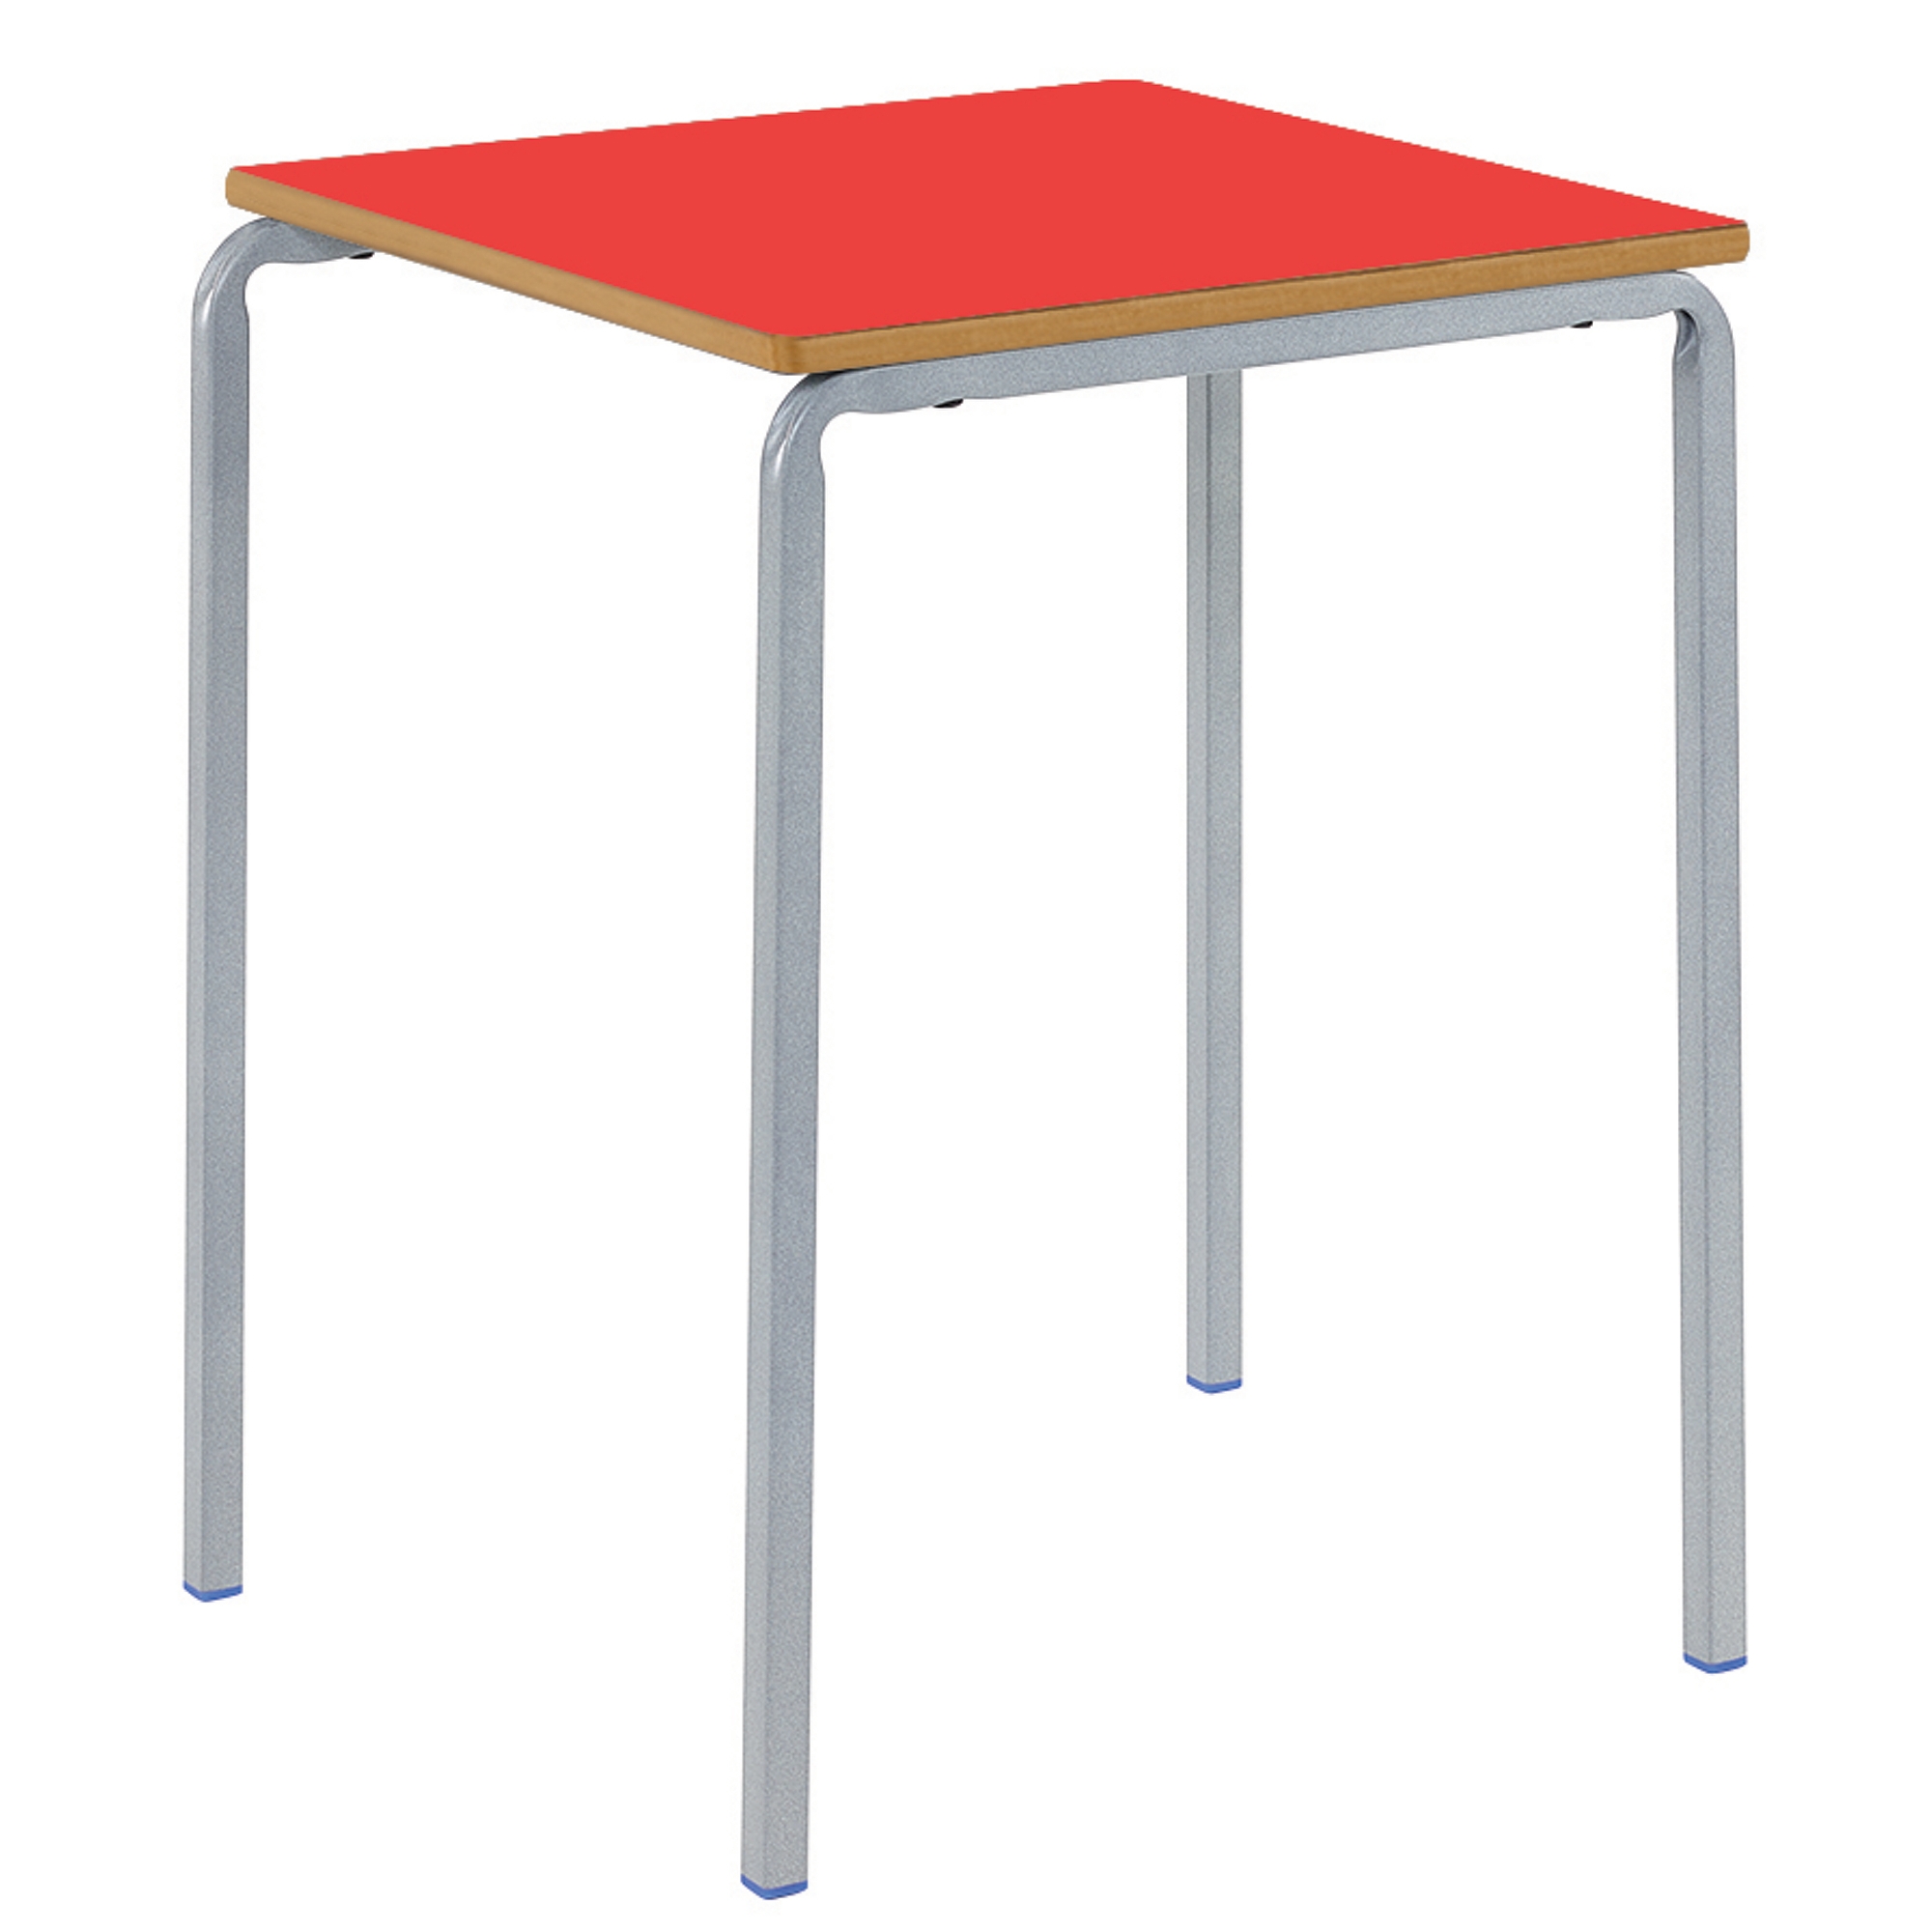 Classmates Square Crushed Bent Classroom Table - 600 x 600 x 760mm - Red